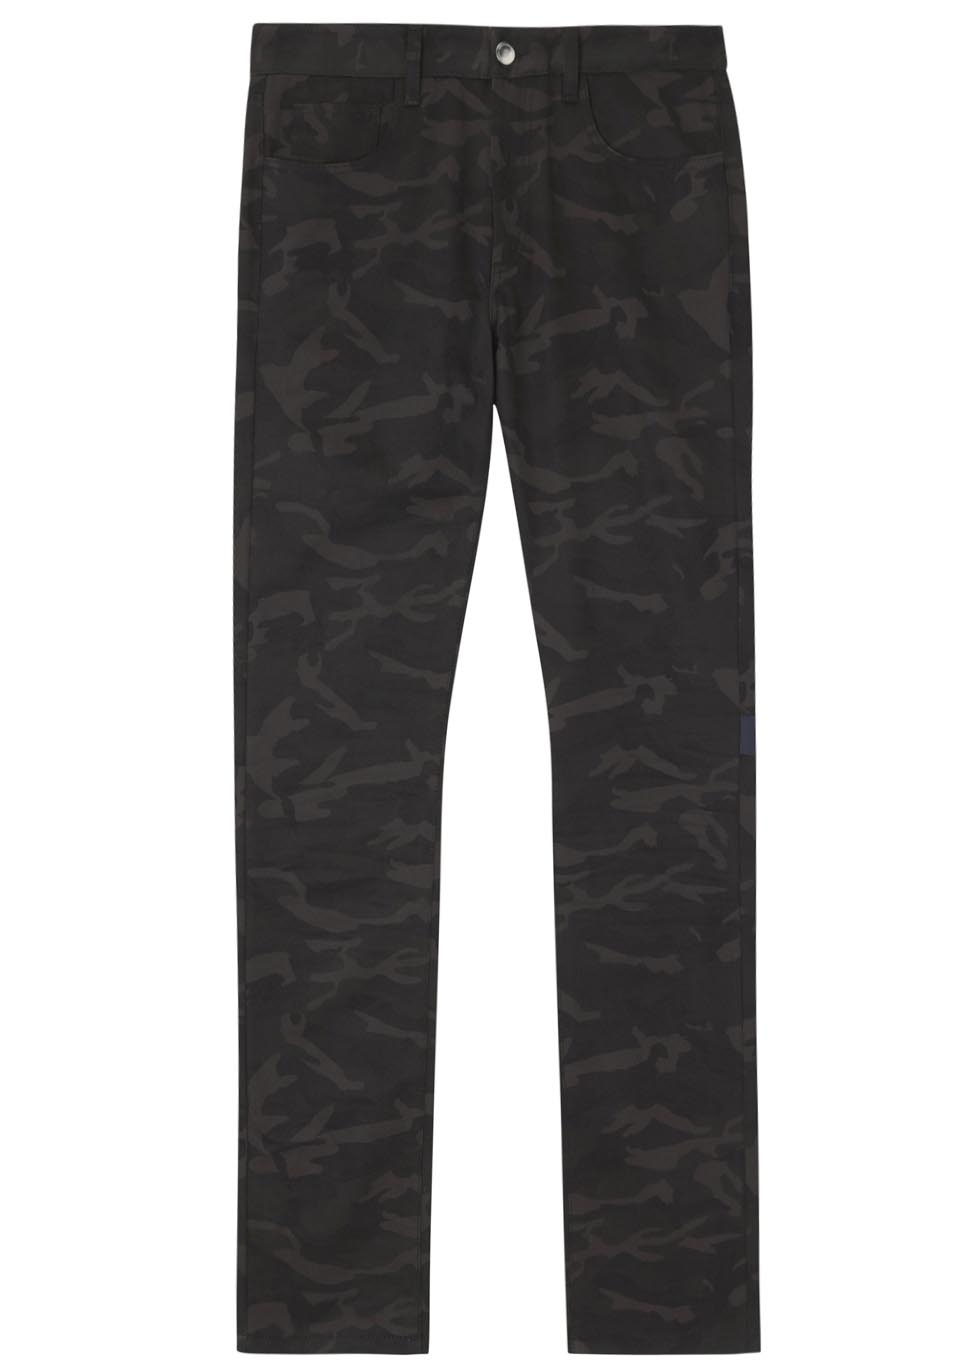 X Sterling Ruby black camouflage print jeans